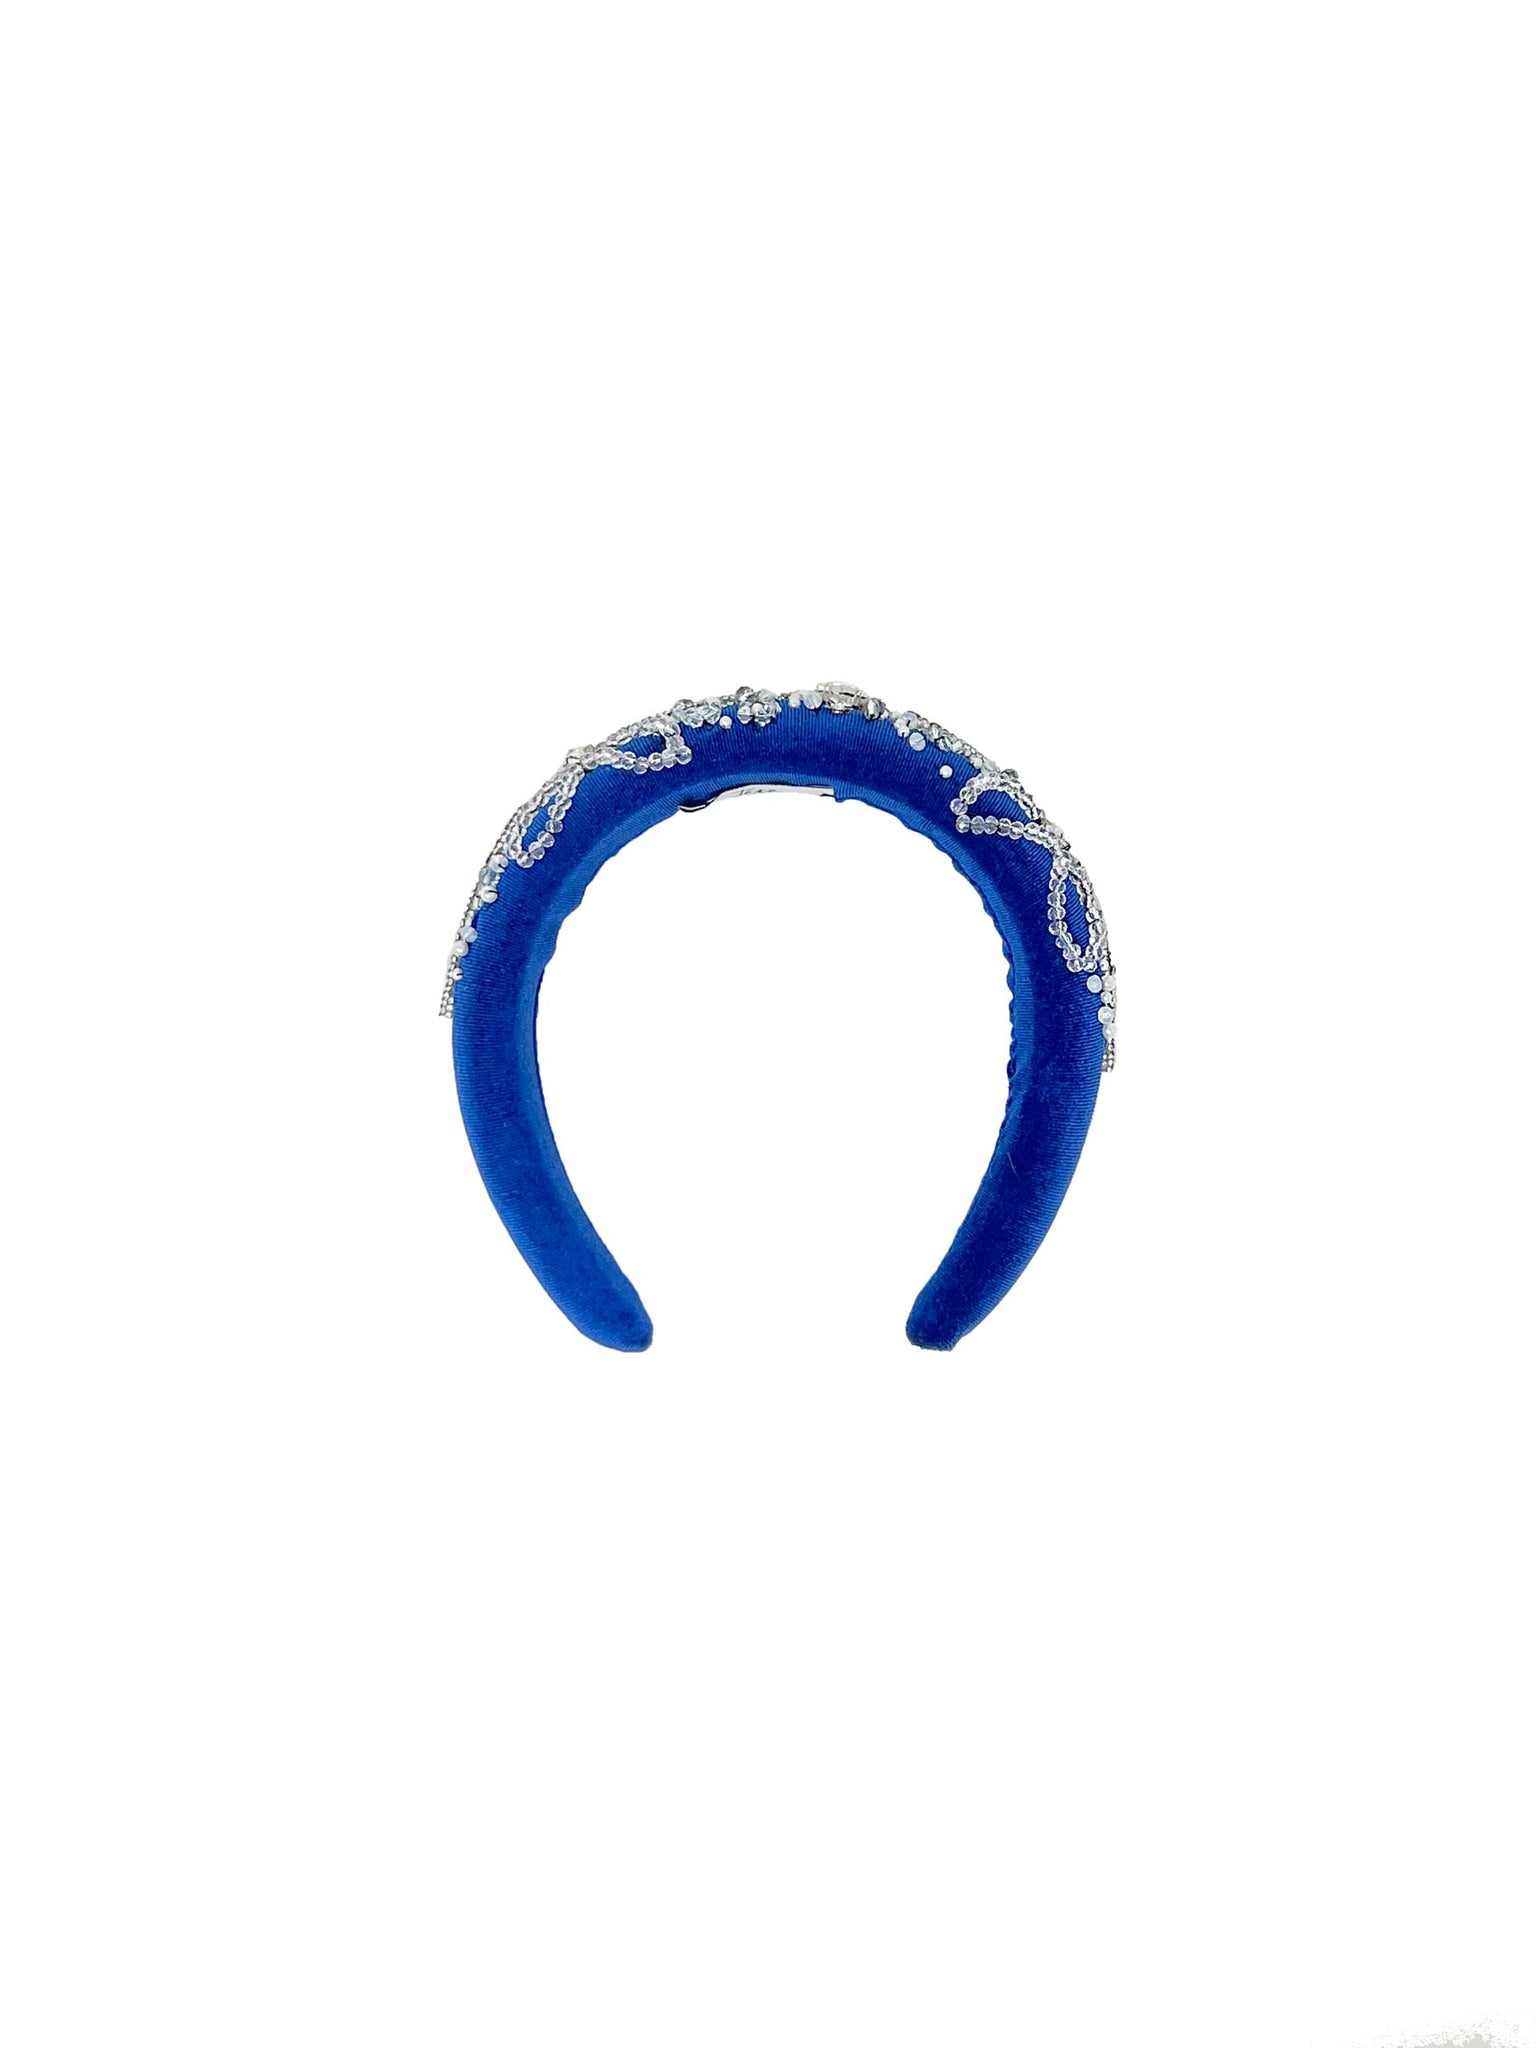 Electric blue velvet padded headband with crystal embroidery